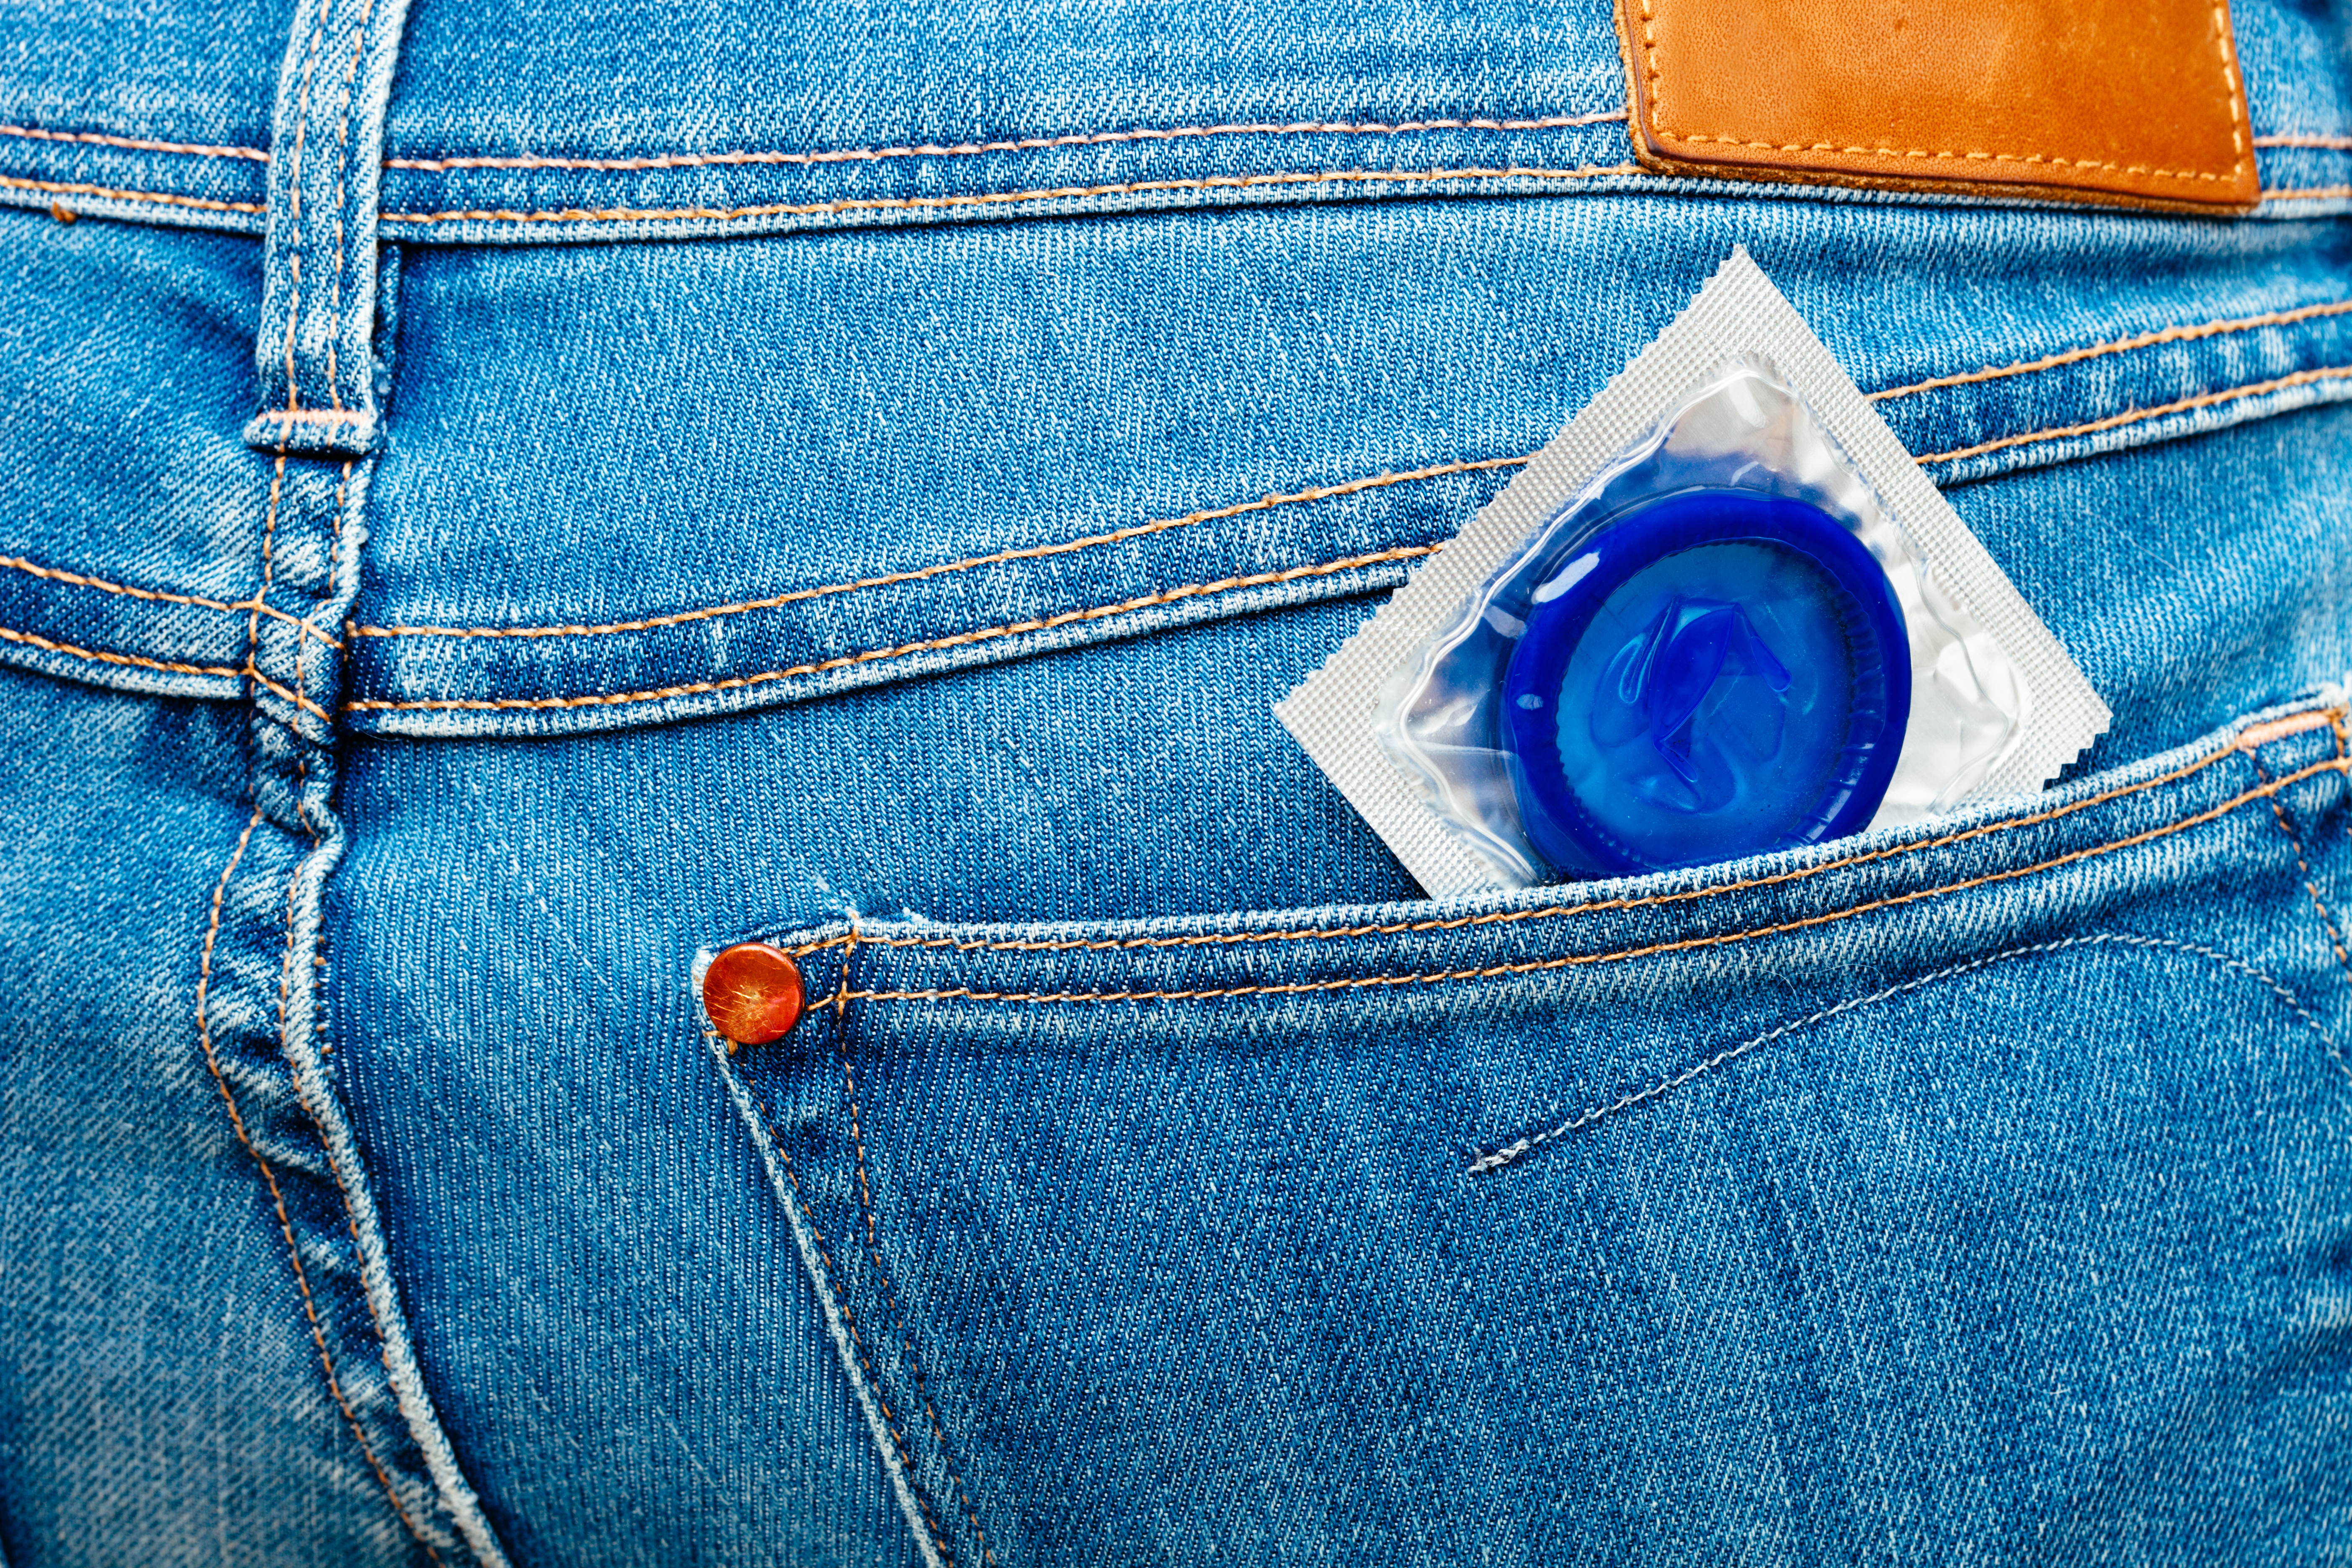 Blue condom in jeans pocket